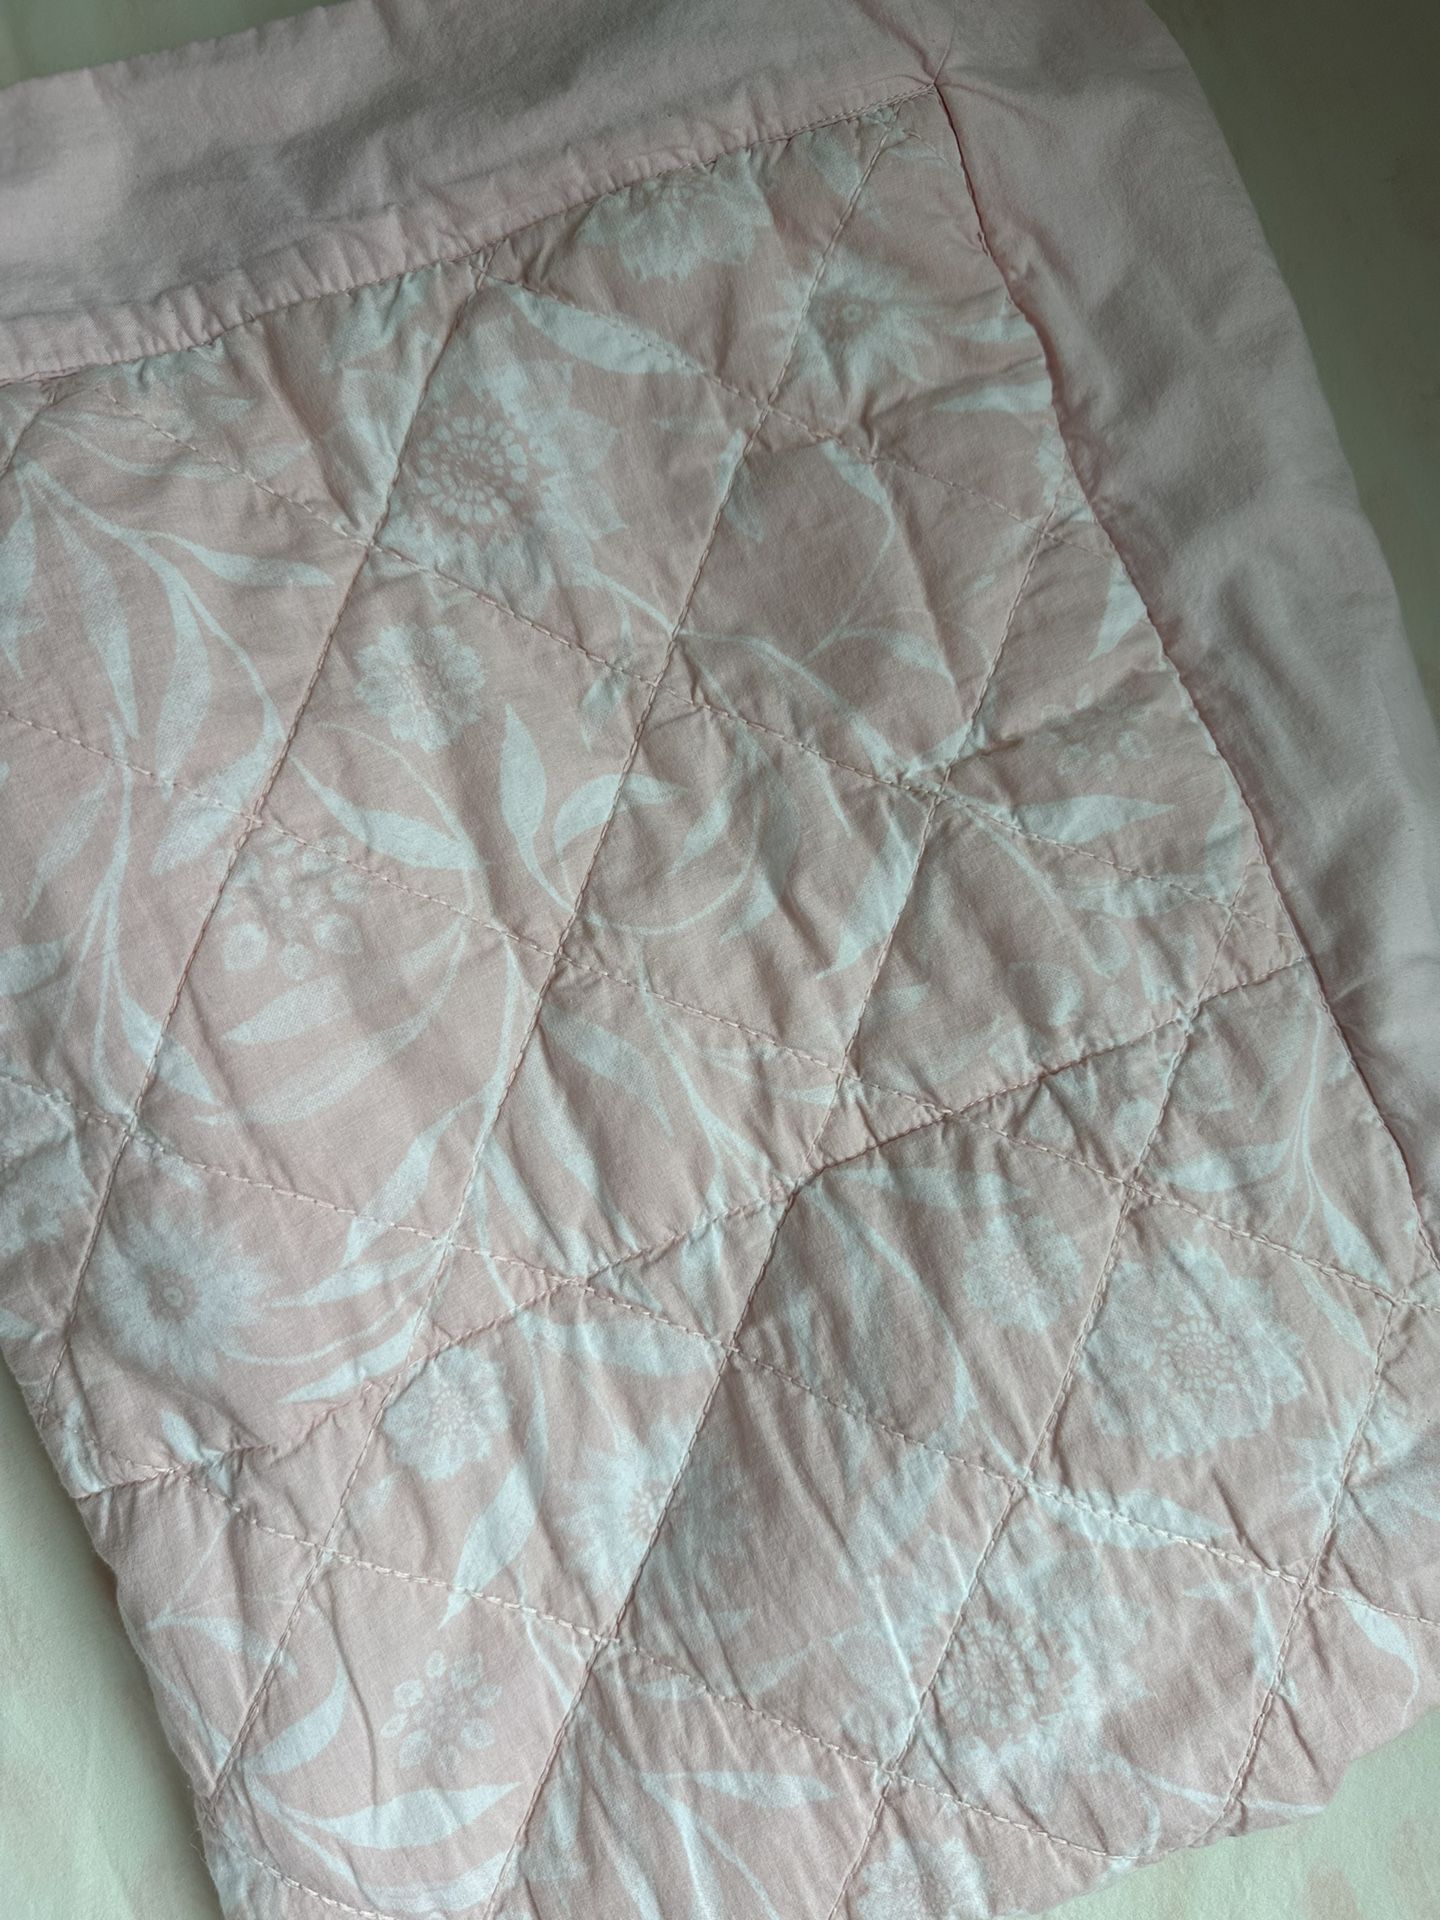 aden + anais Toddler-Bed Weighted Blanket  Cotton Shell – Machine Washable, Ophelia (Pink) $40 